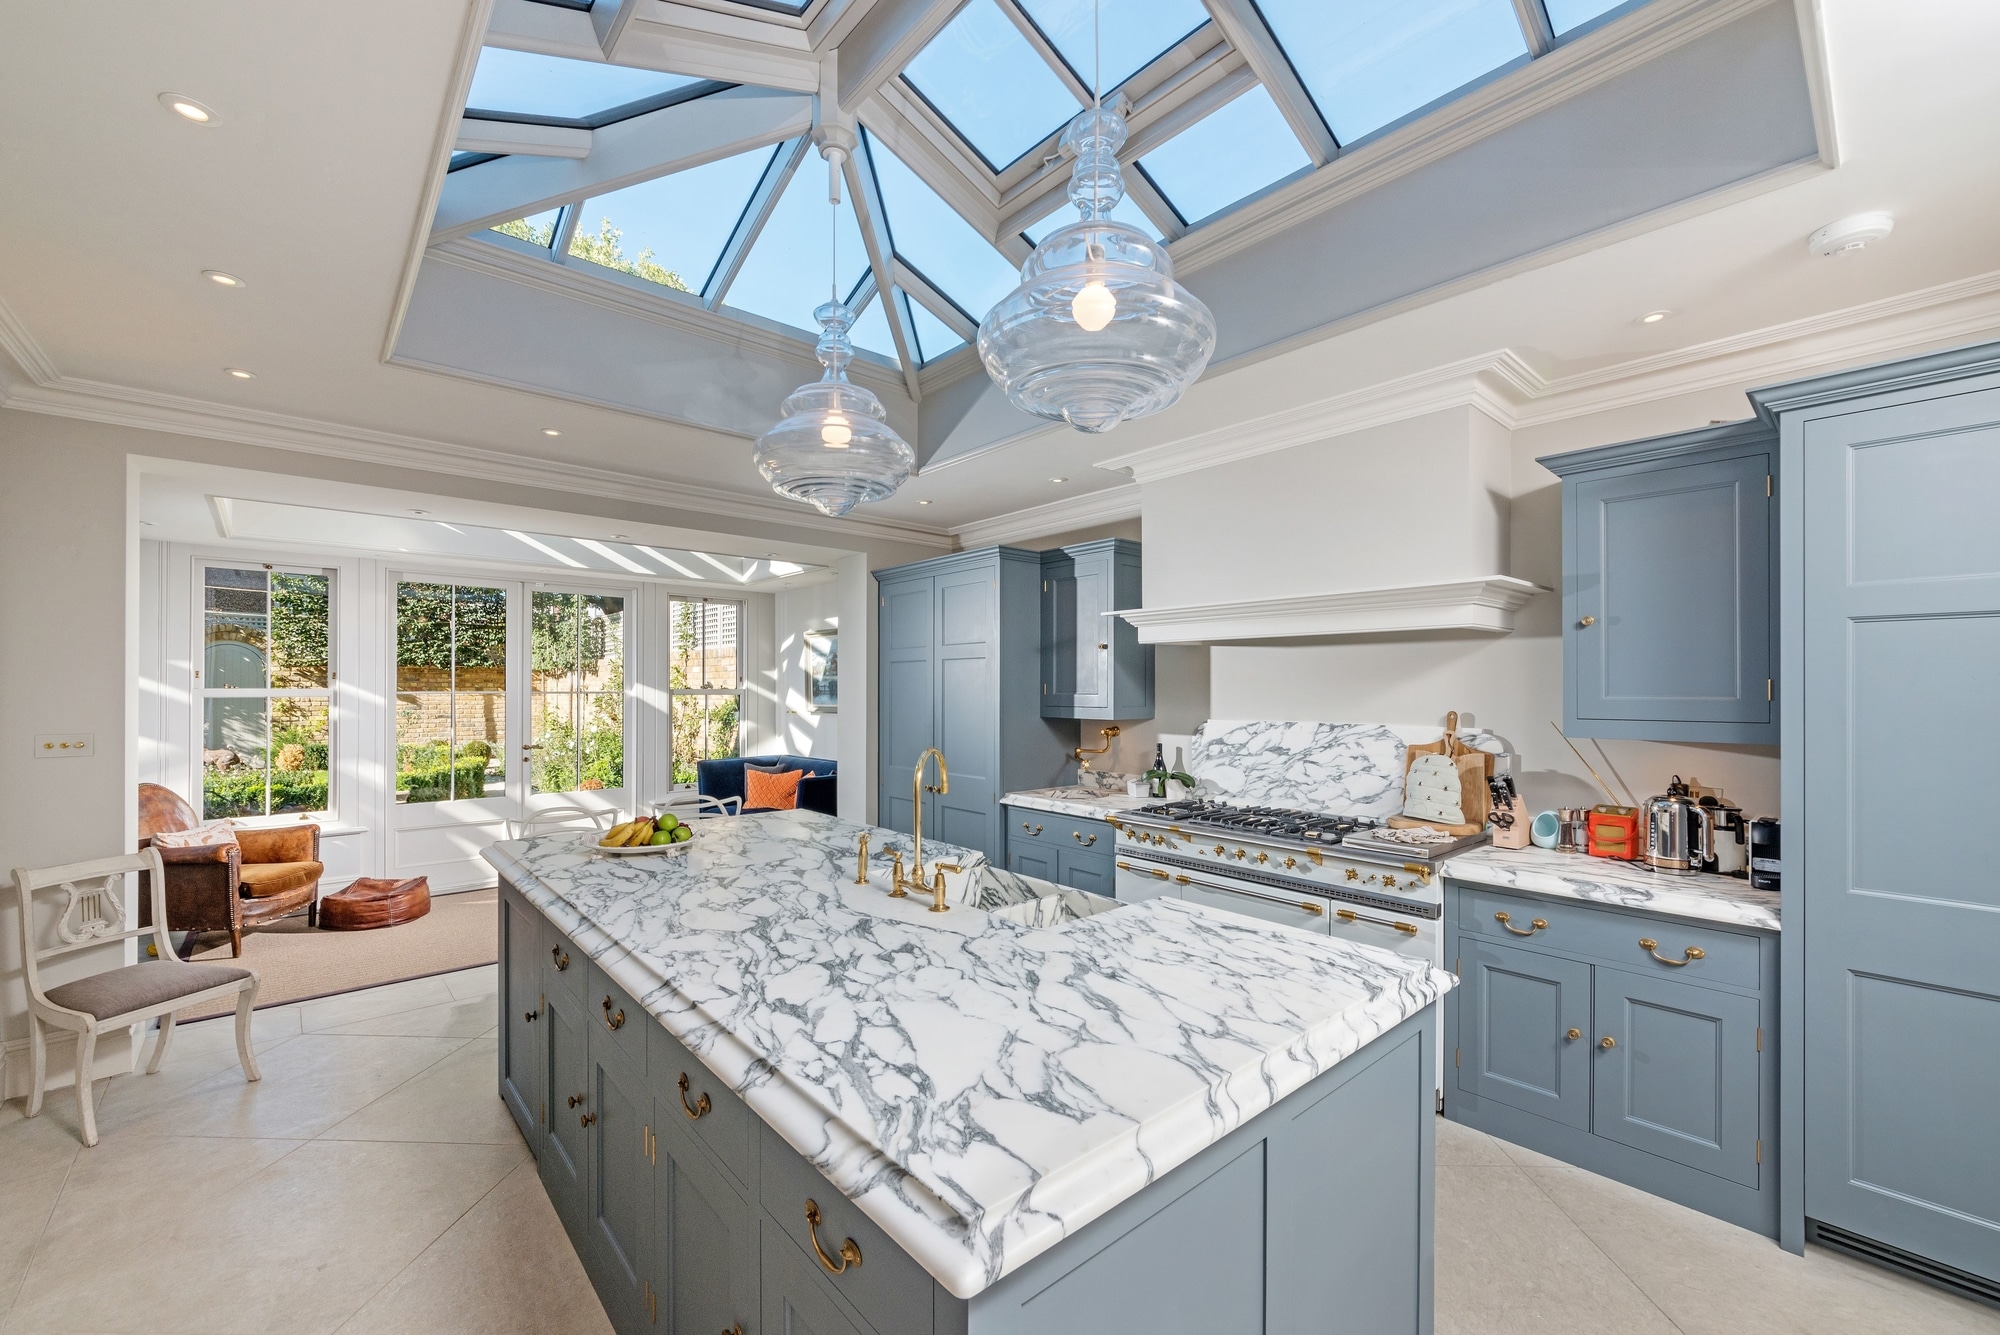 Featured image for “Five key considerations when designing a kitchen extension”